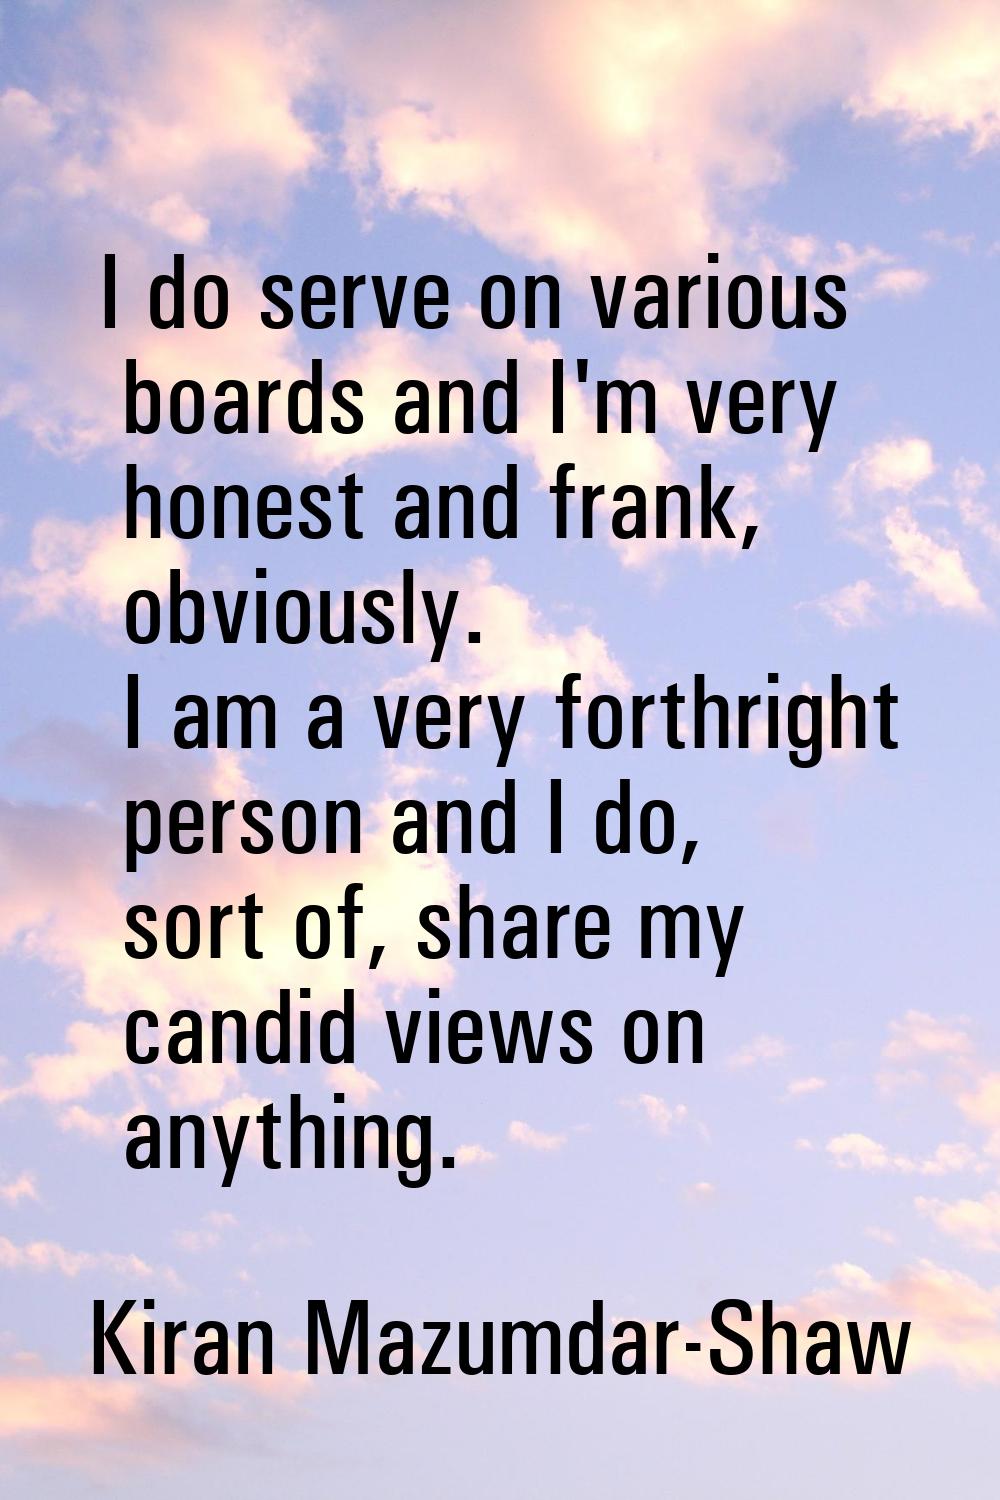 I do serve on various boards and I'm very honest and frank, obviously. I am a very forthright perso